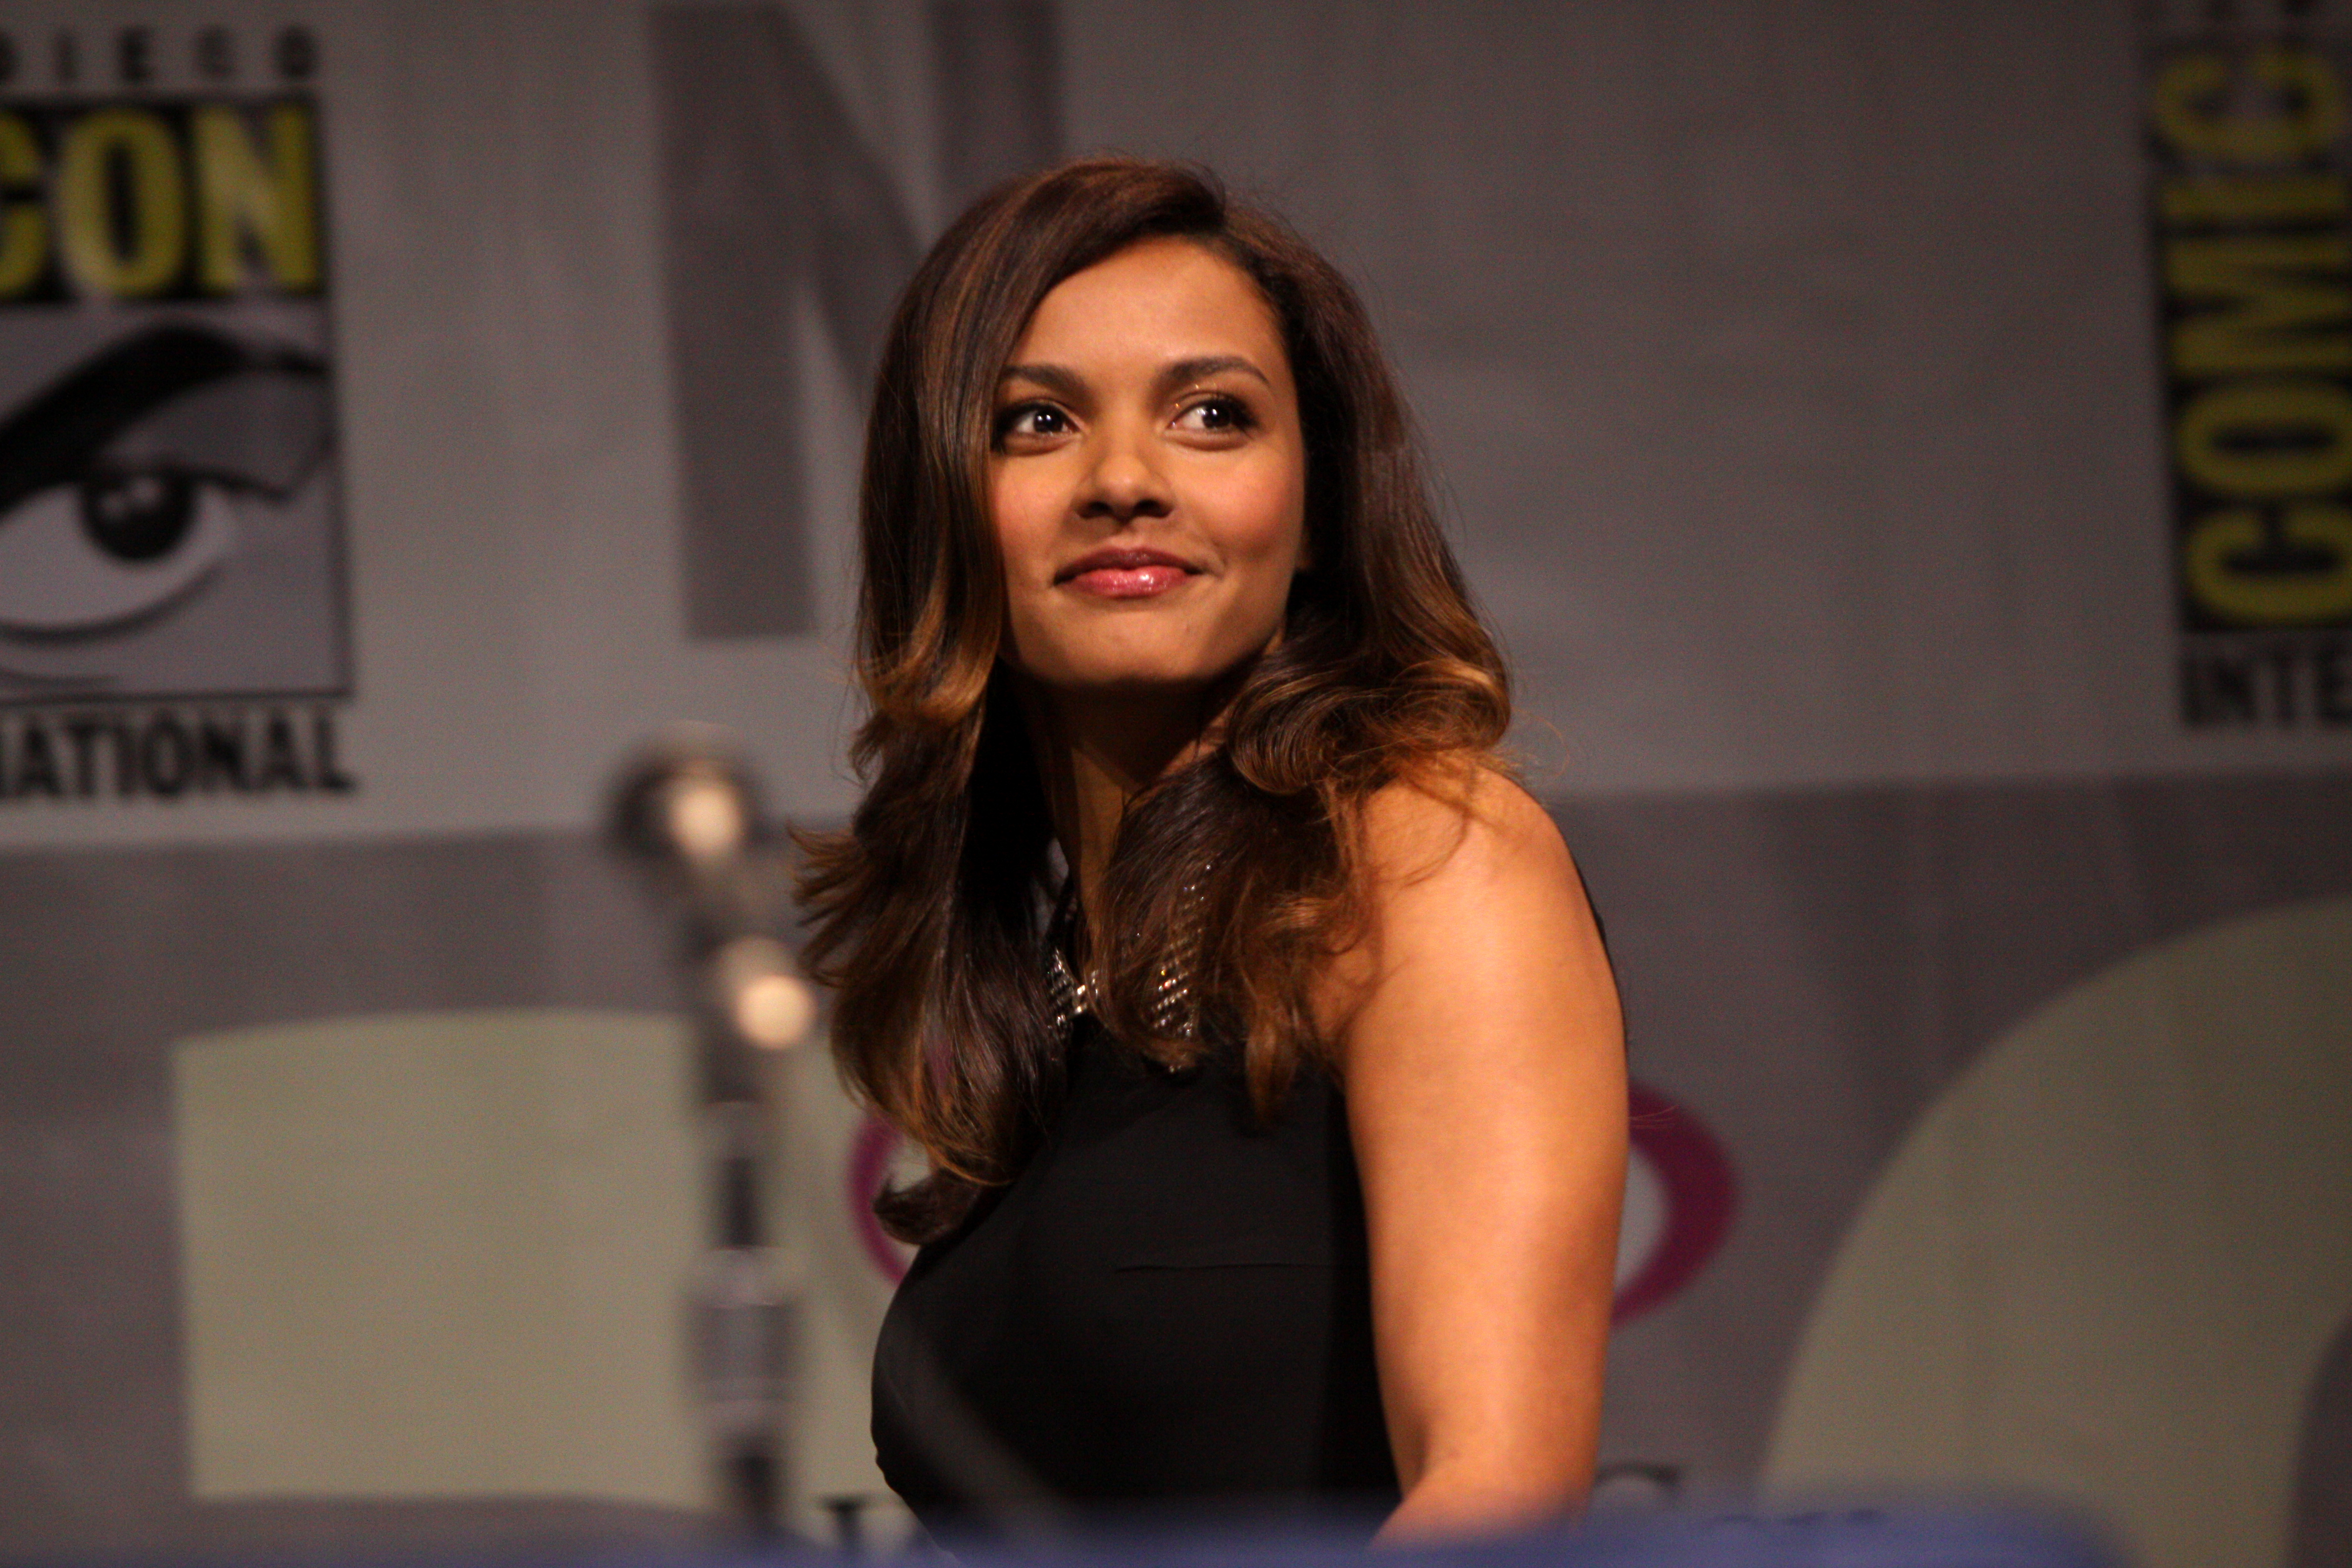 Jessica Lucas Wallpaper Image Photos Pictures Background